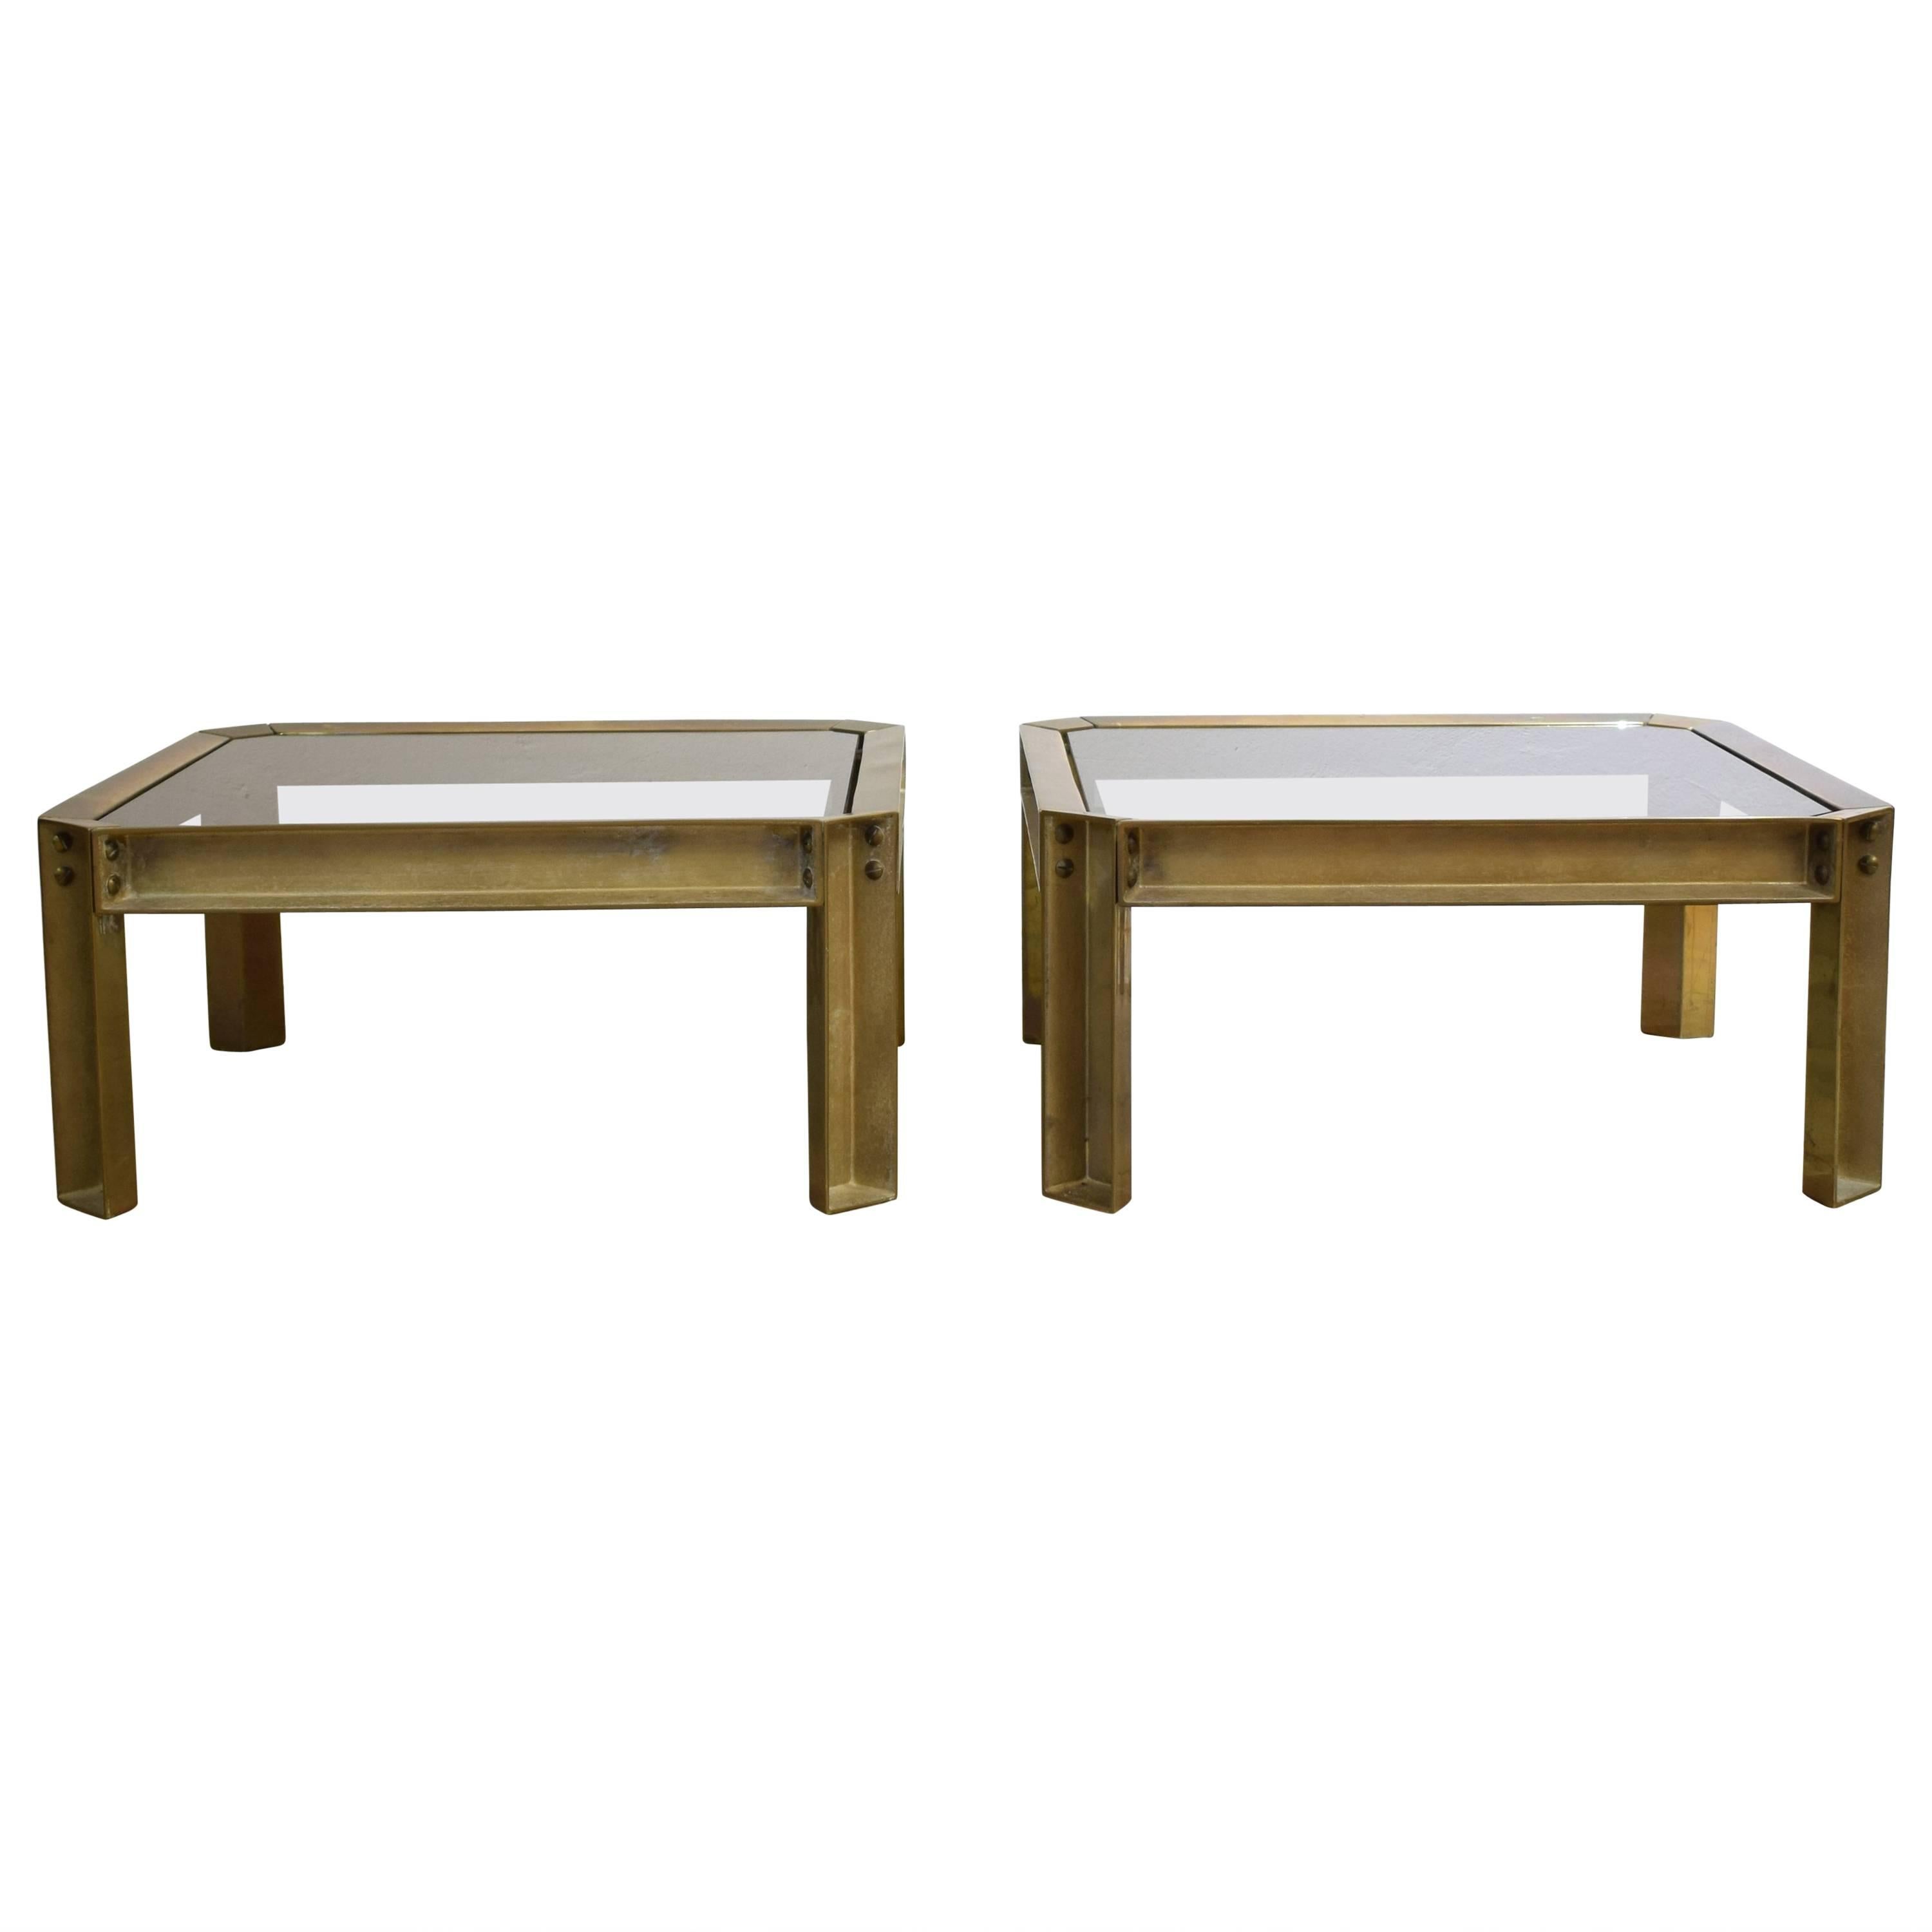 Pair of Casted Brass Coffee Tables with Smoked Glass Top by Peter Ghyczy, 1970s